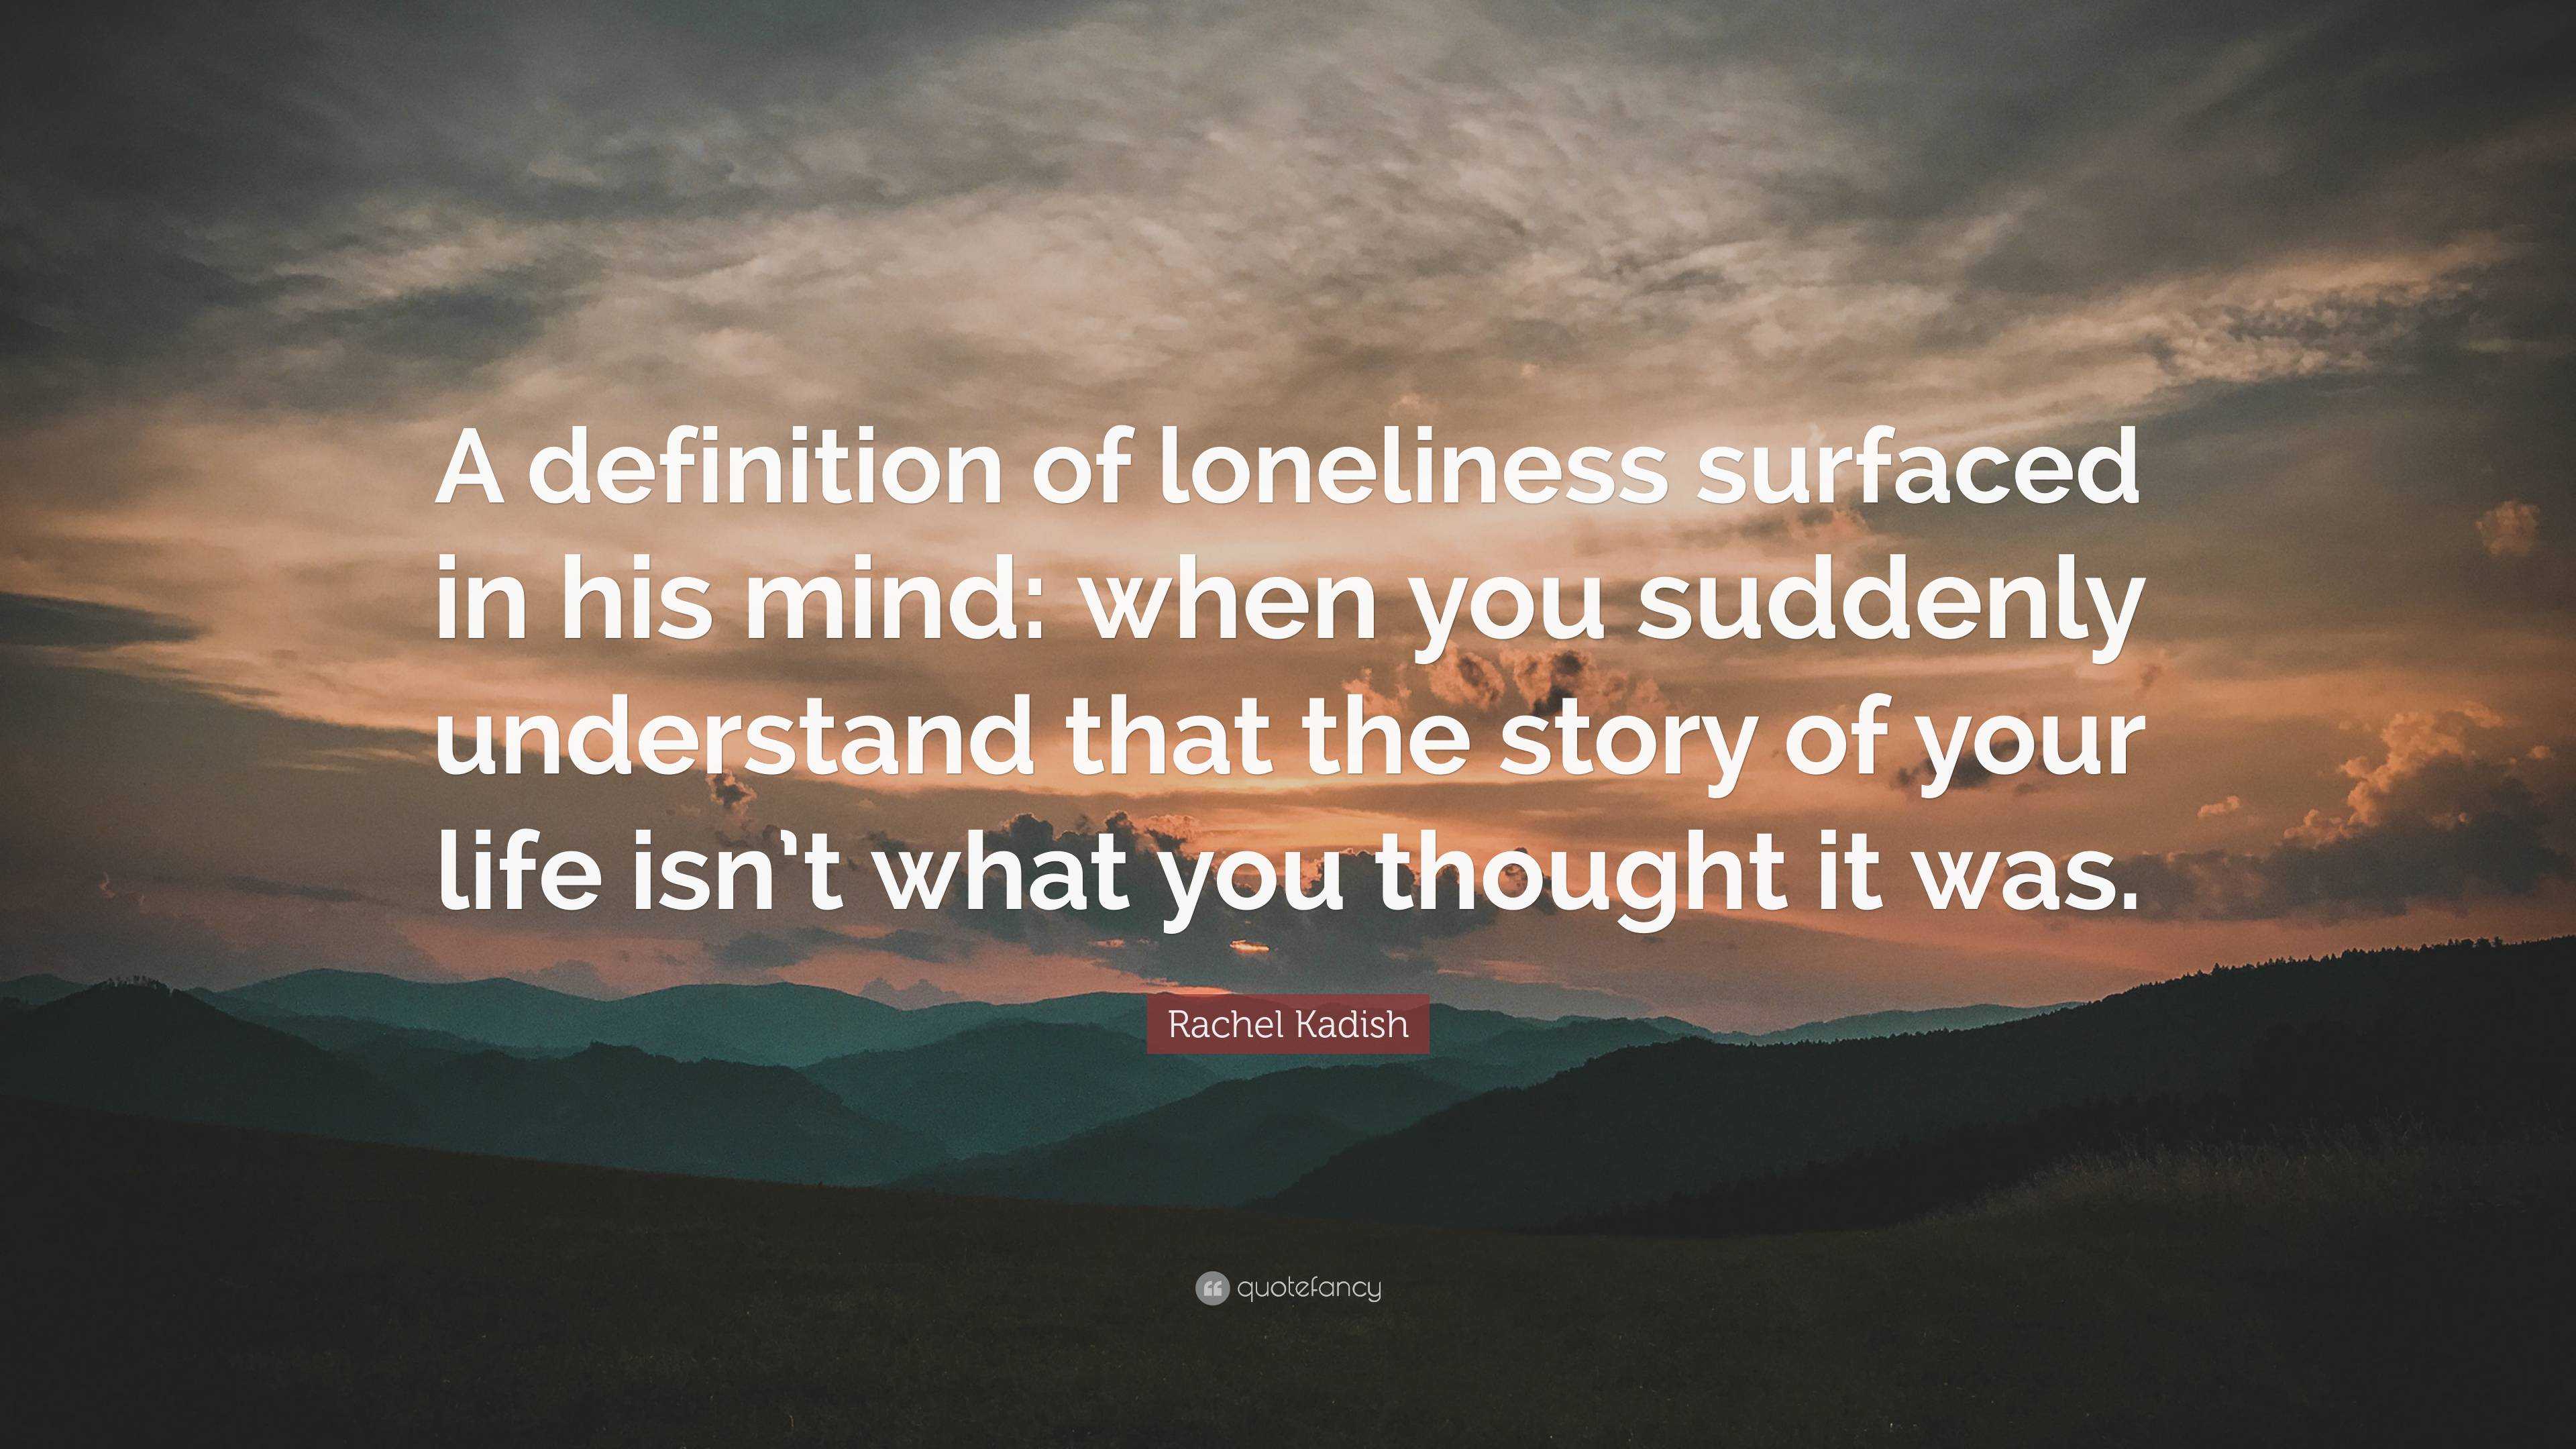 extended definition essay on loneliness